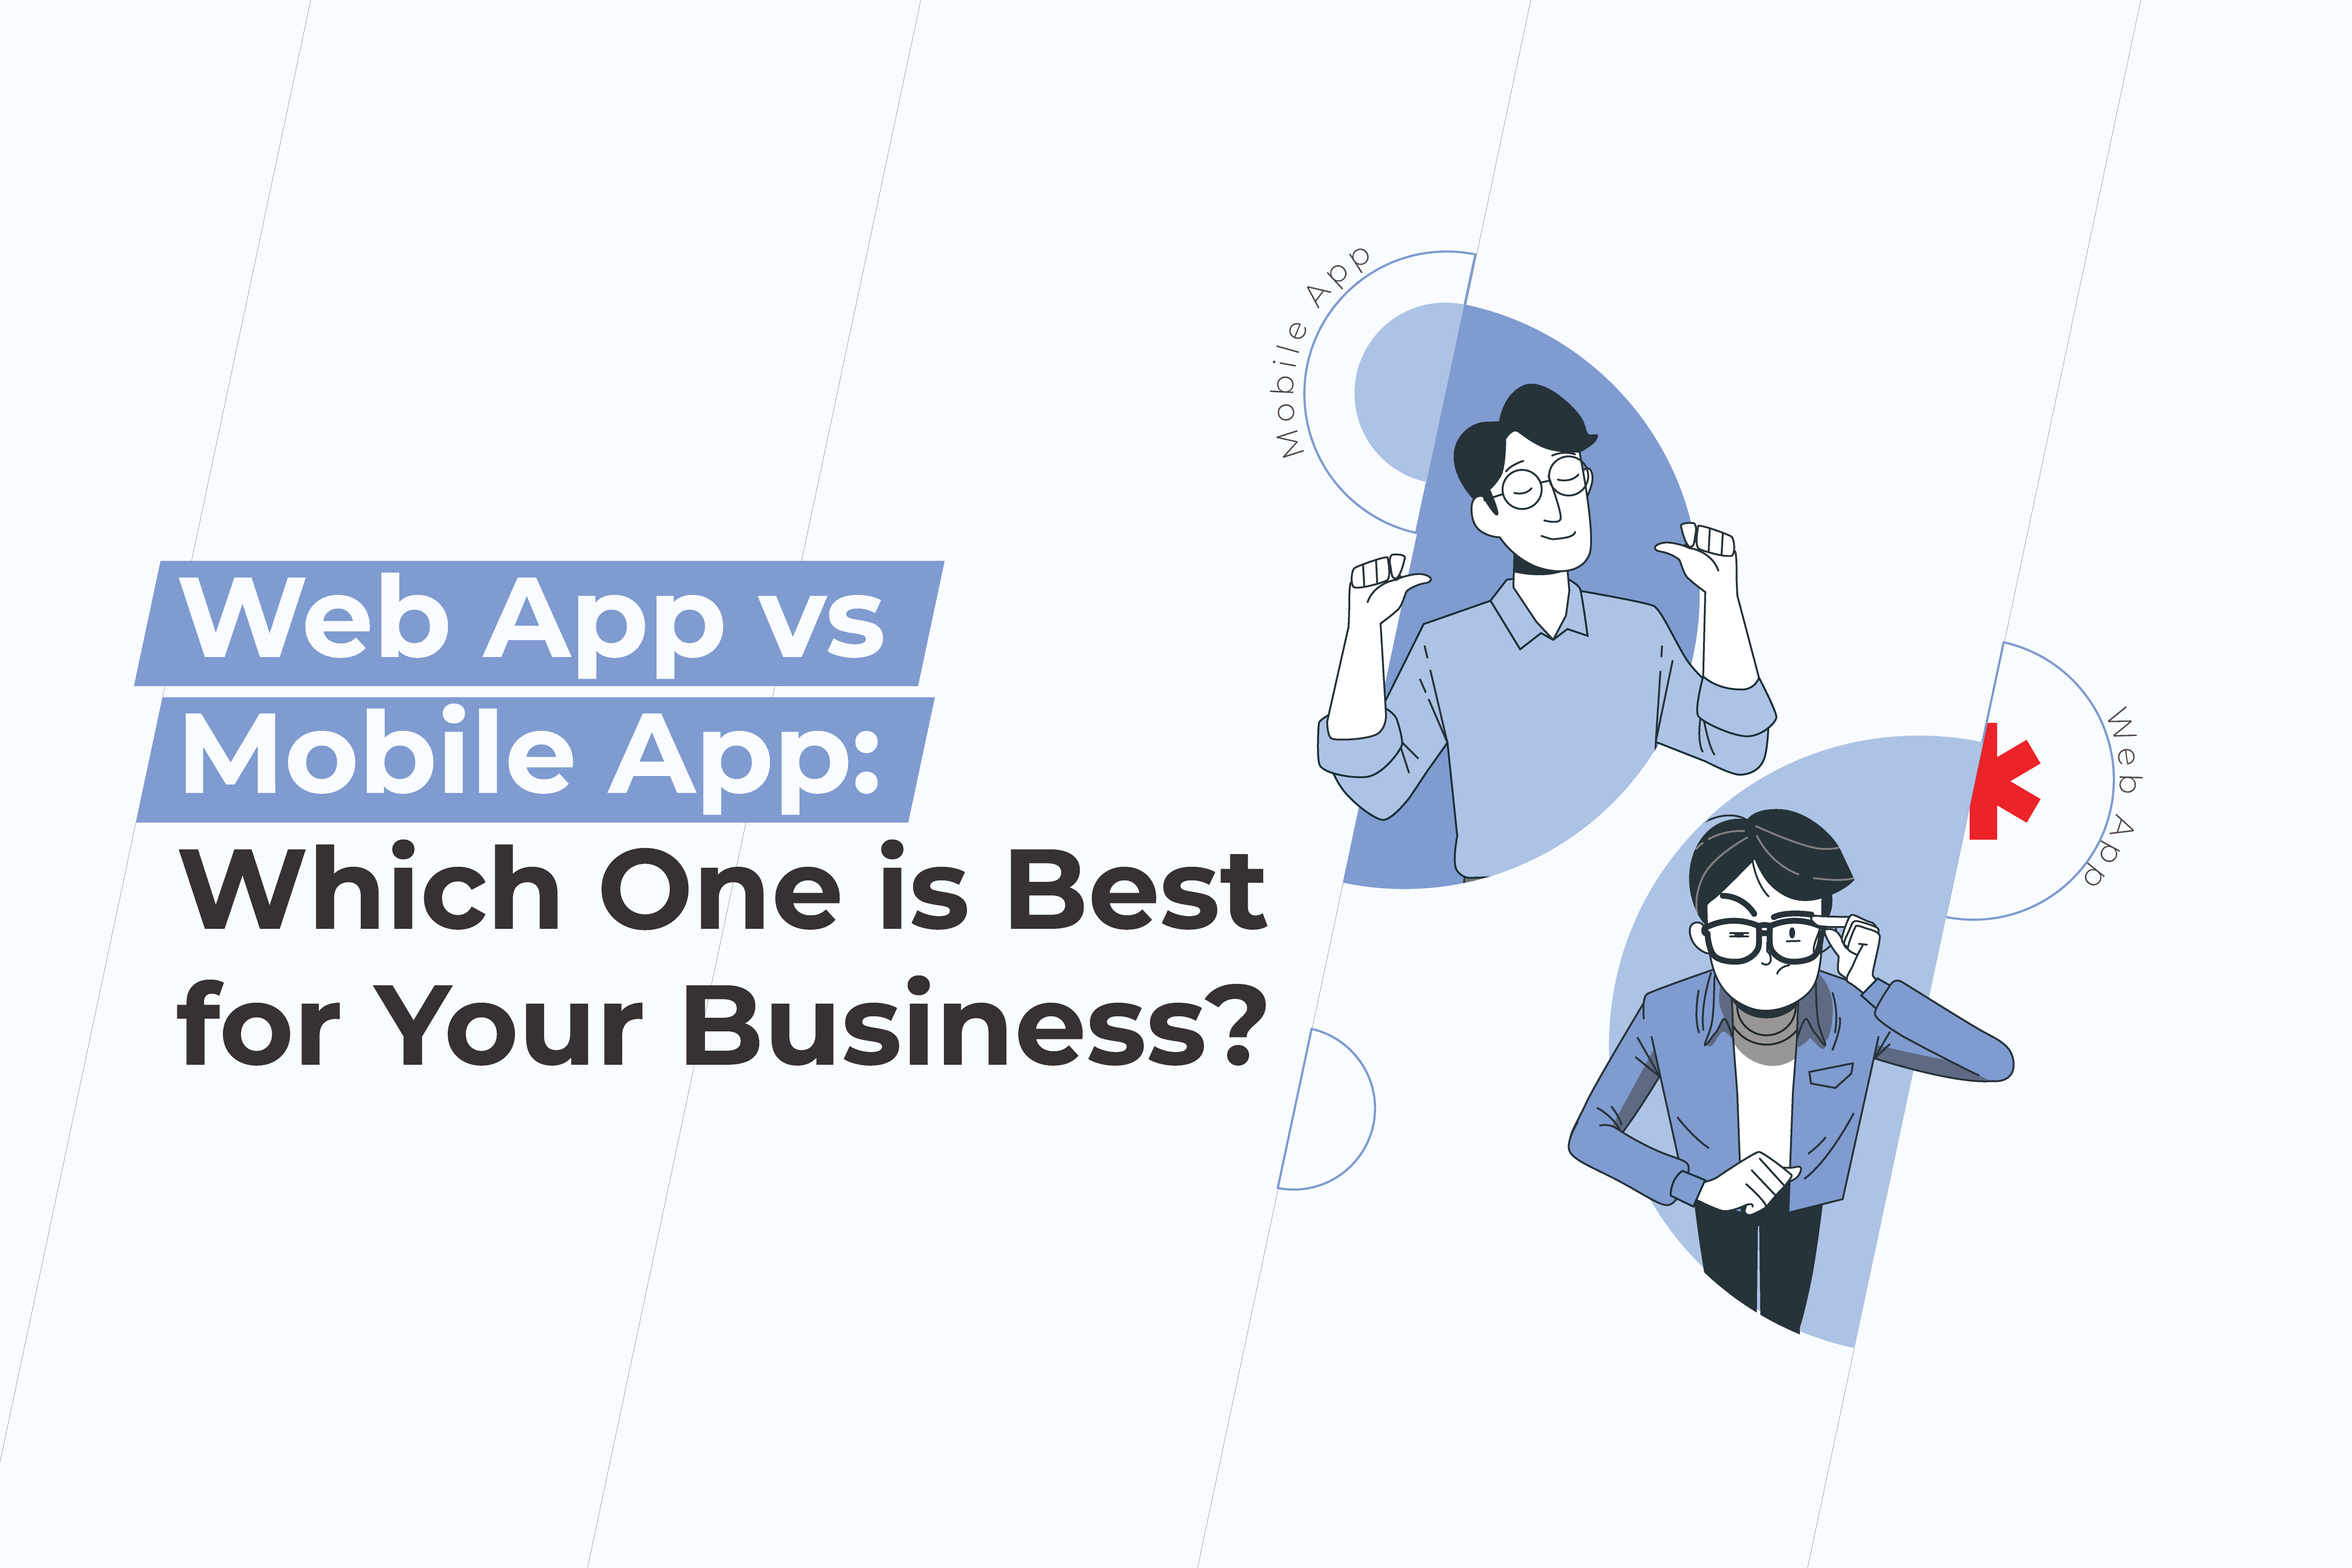 Web App vs Mobile App: Which One is Best for Your Business?